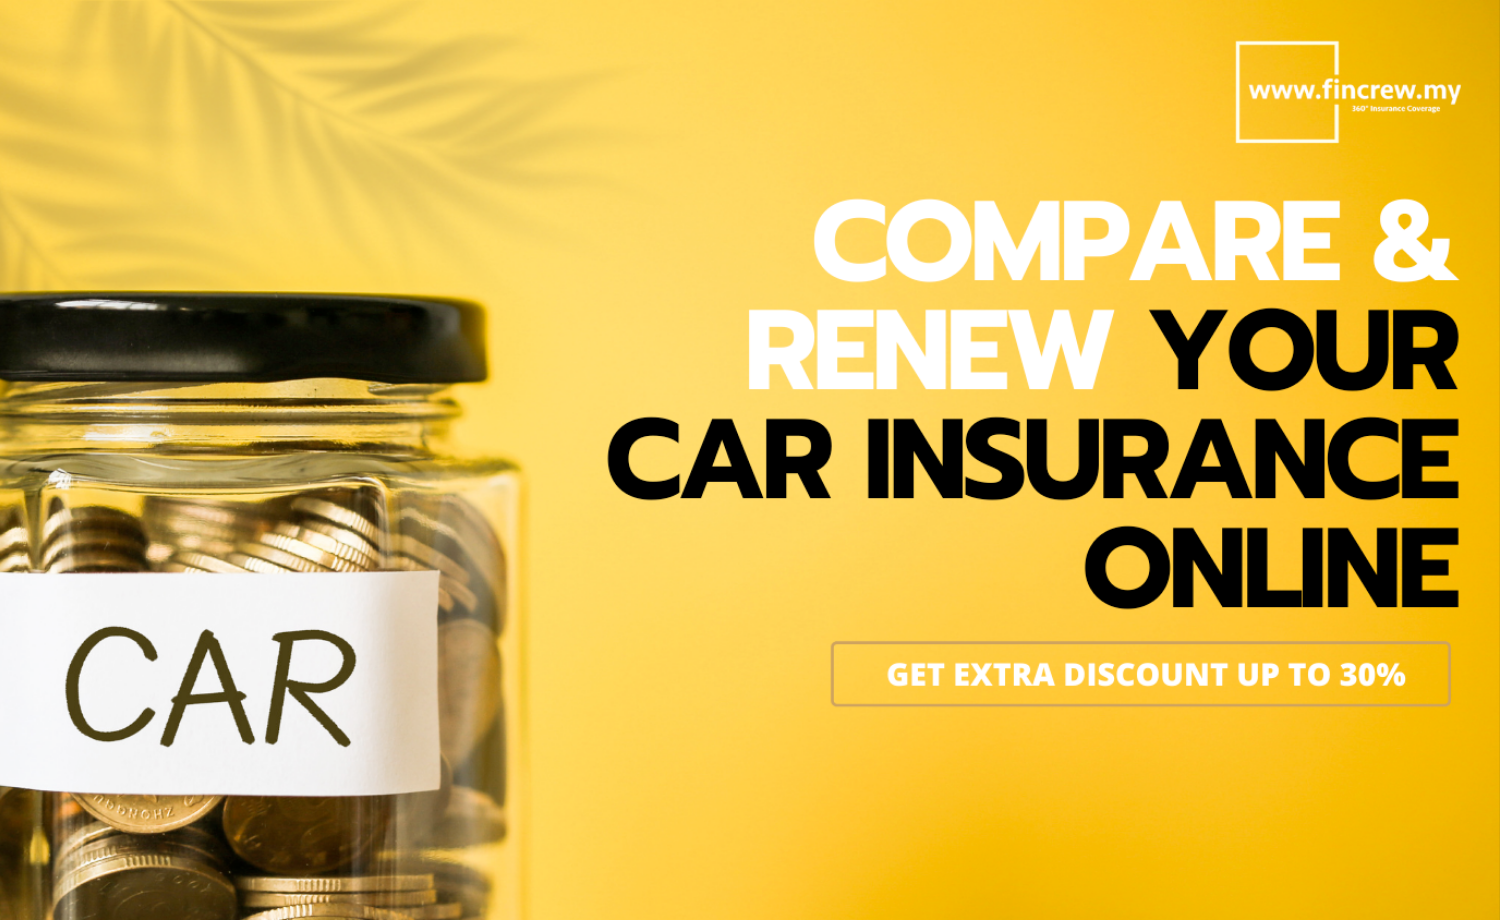 Compare & Renew Your Car Insurance Online blog featured image